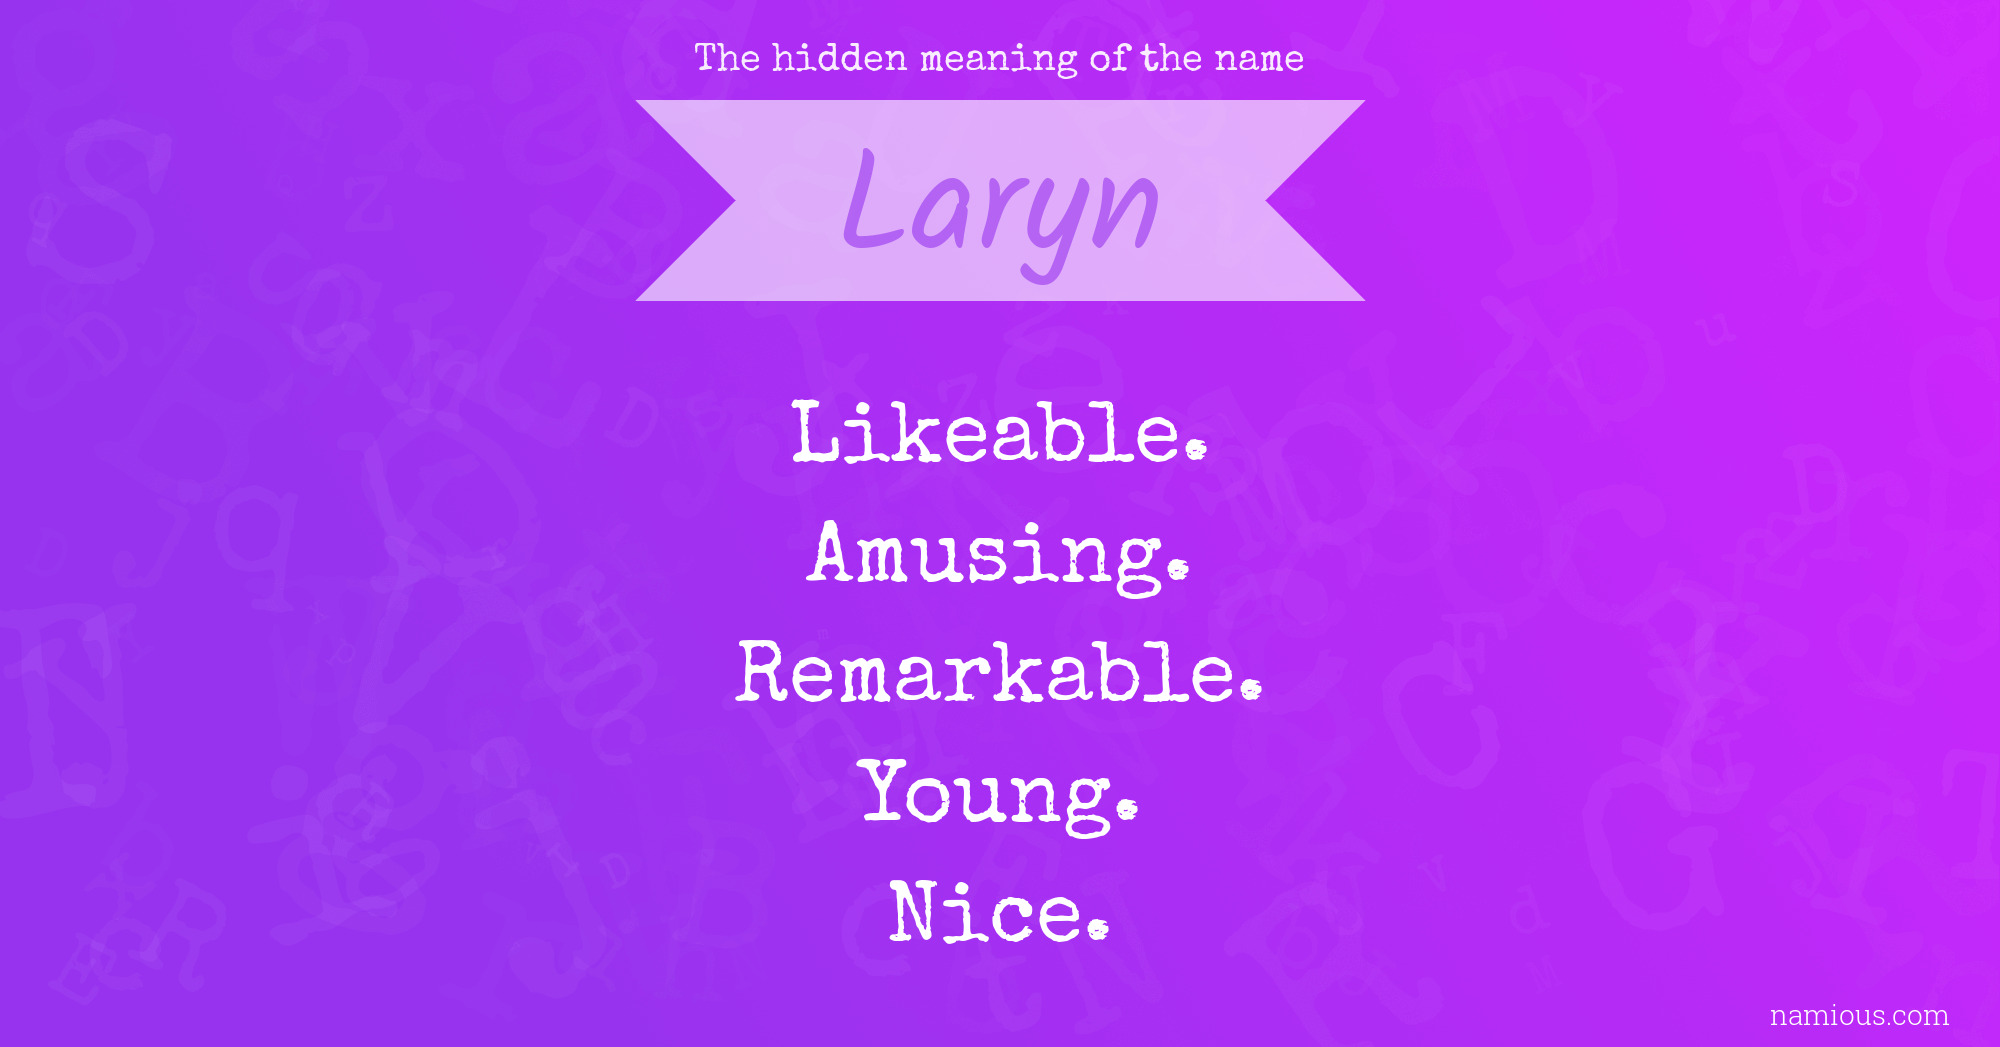 The hidden meaning of the name Laryn